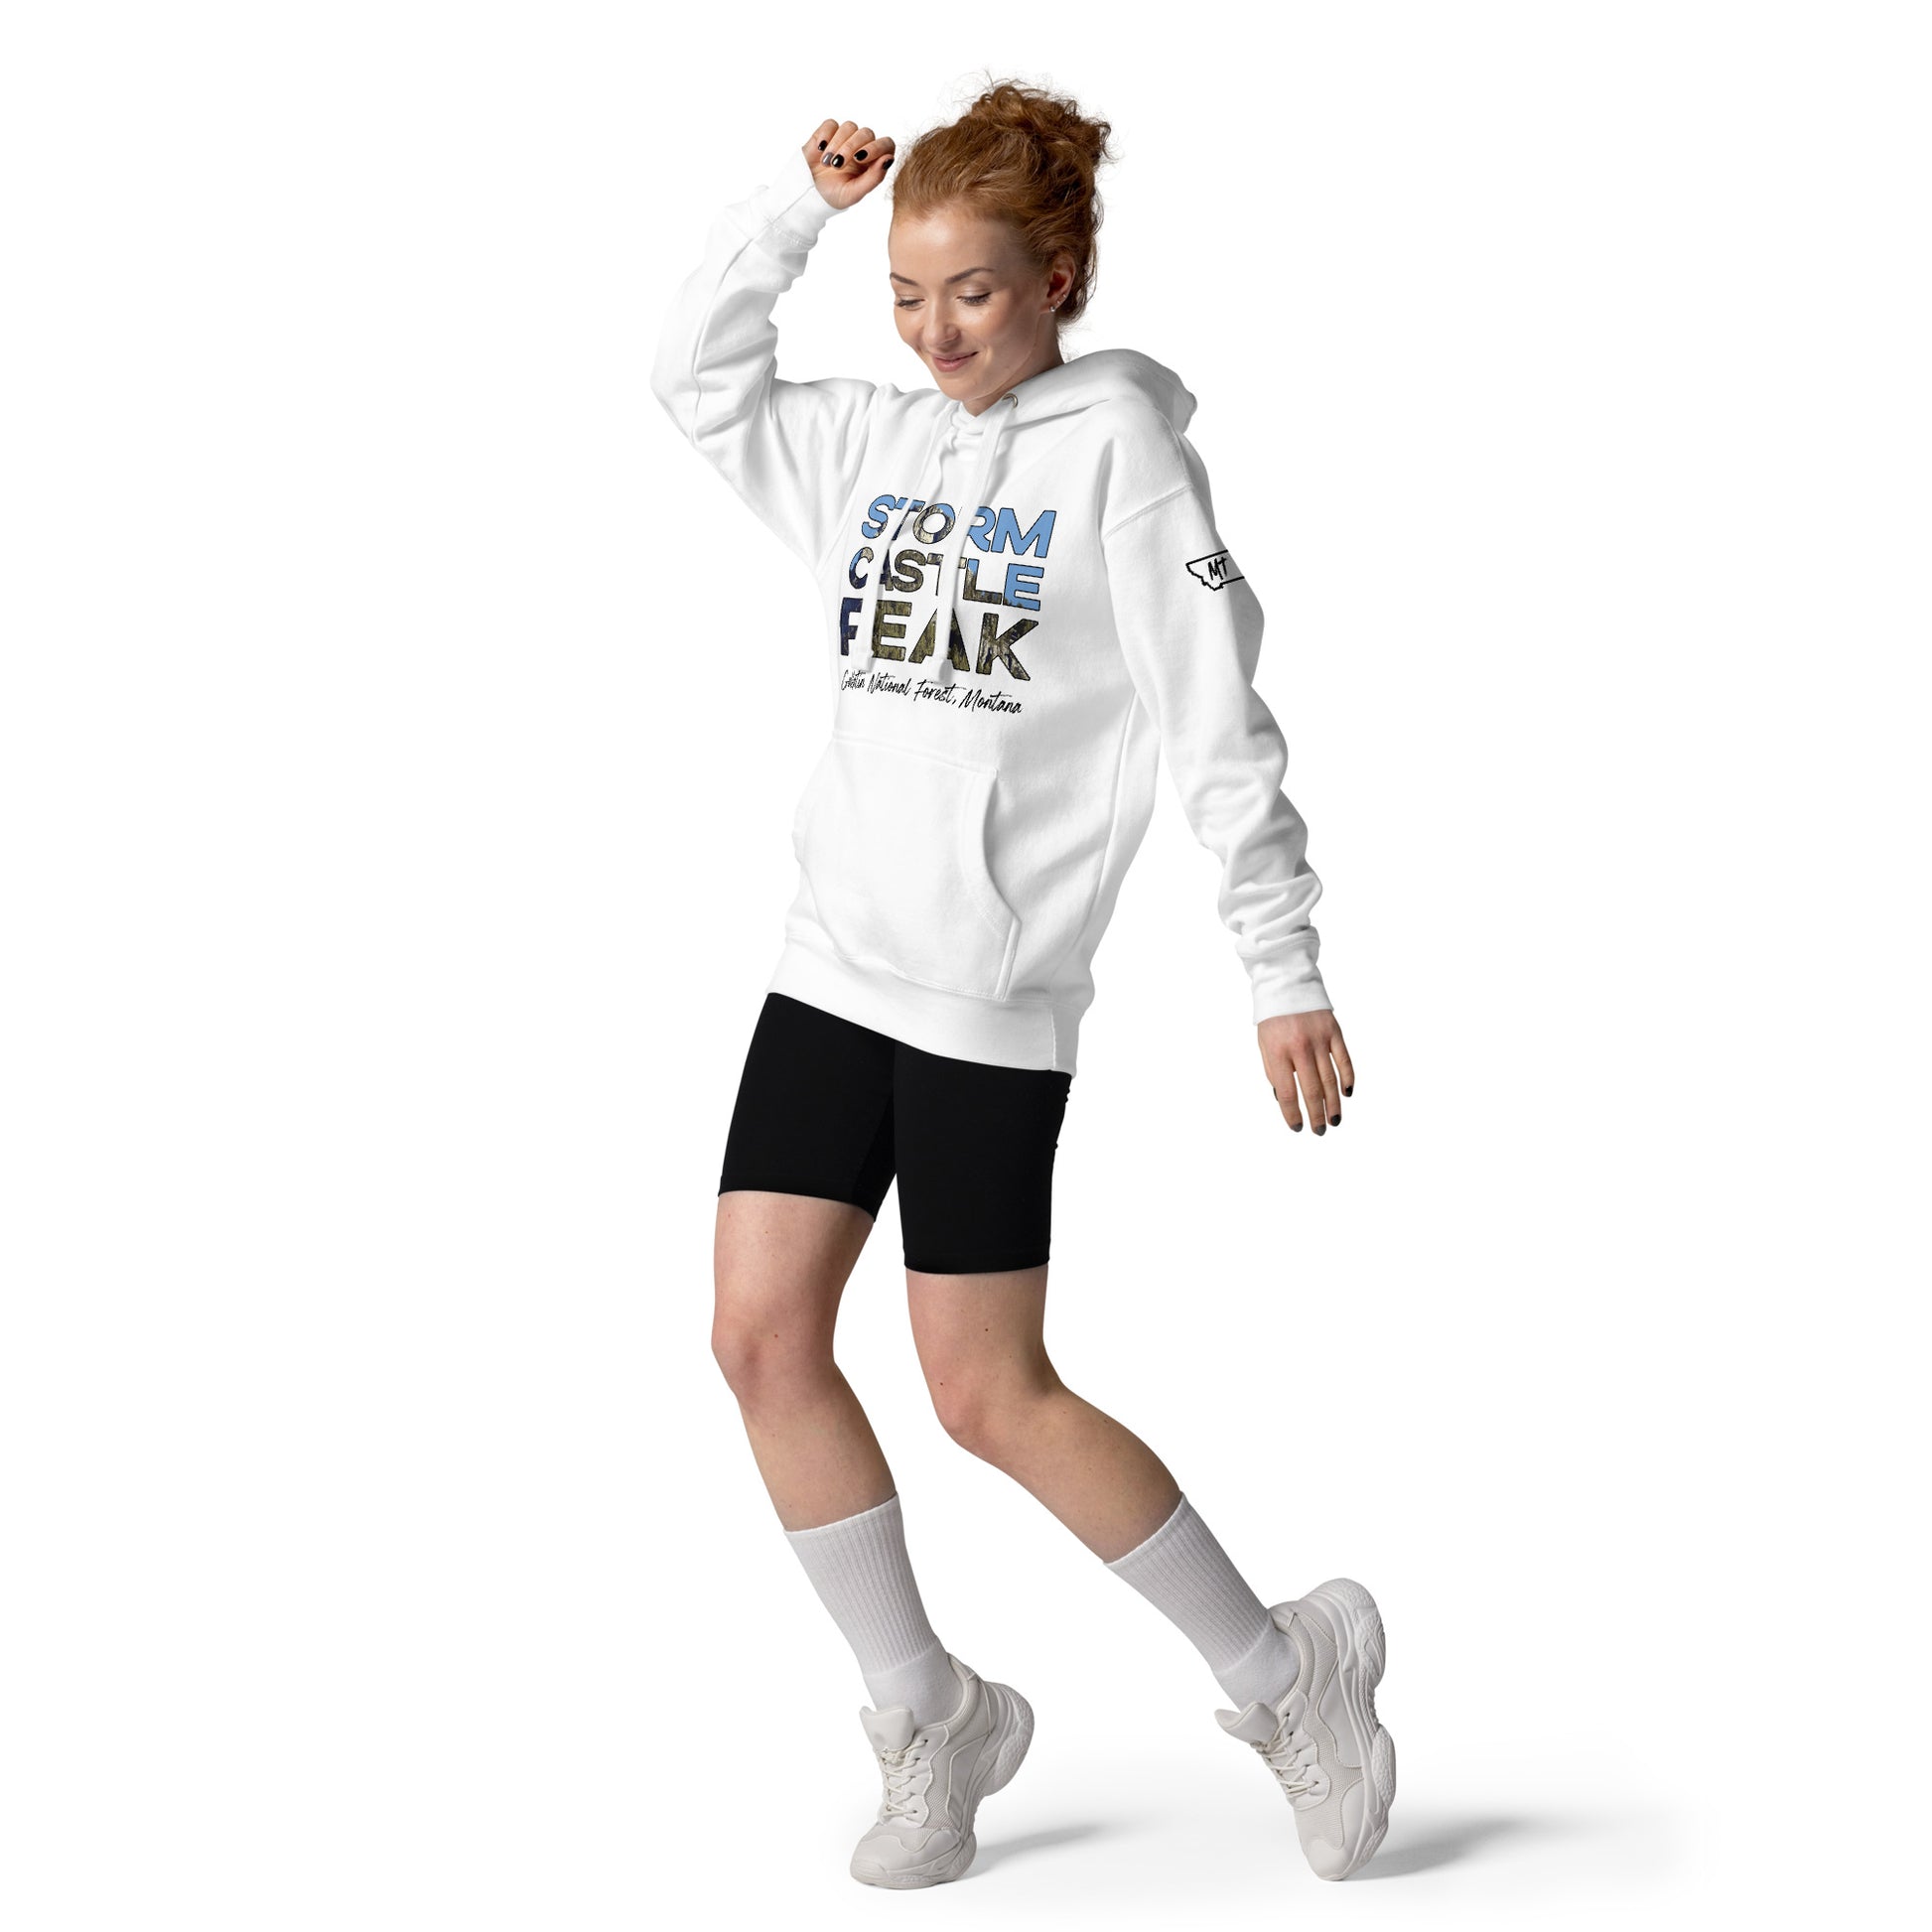 Front-Side view of Storm Castle Peak in Custer Gallatin National Forest Montana White Women's Hoodie from Park Attire